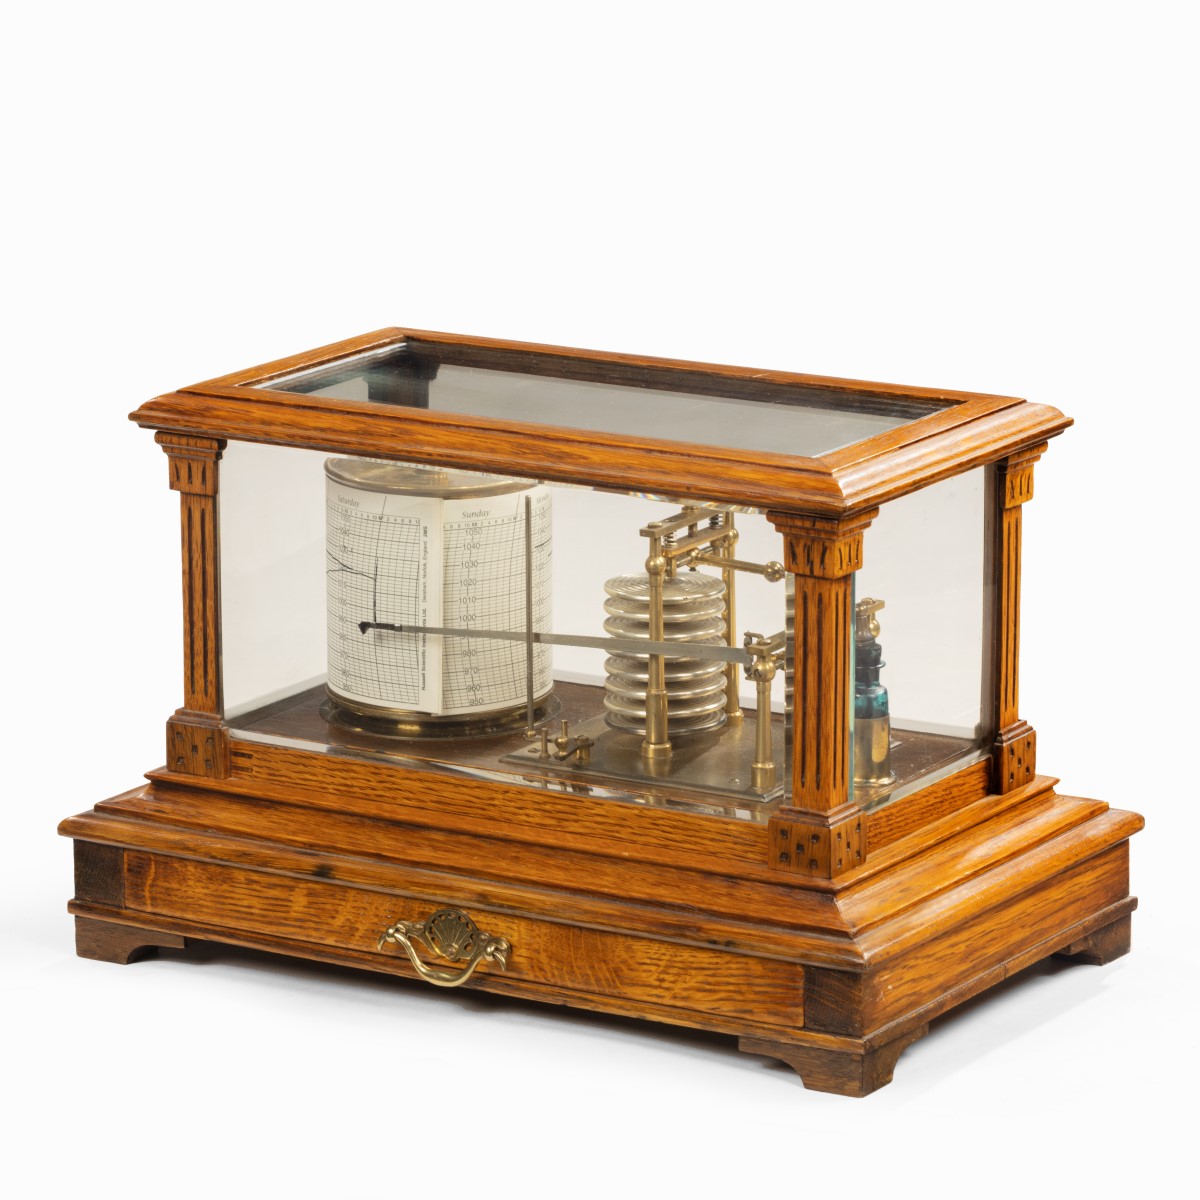 An Edwardian cased oak barograph with bevelled glass panels and a central chart drawer.